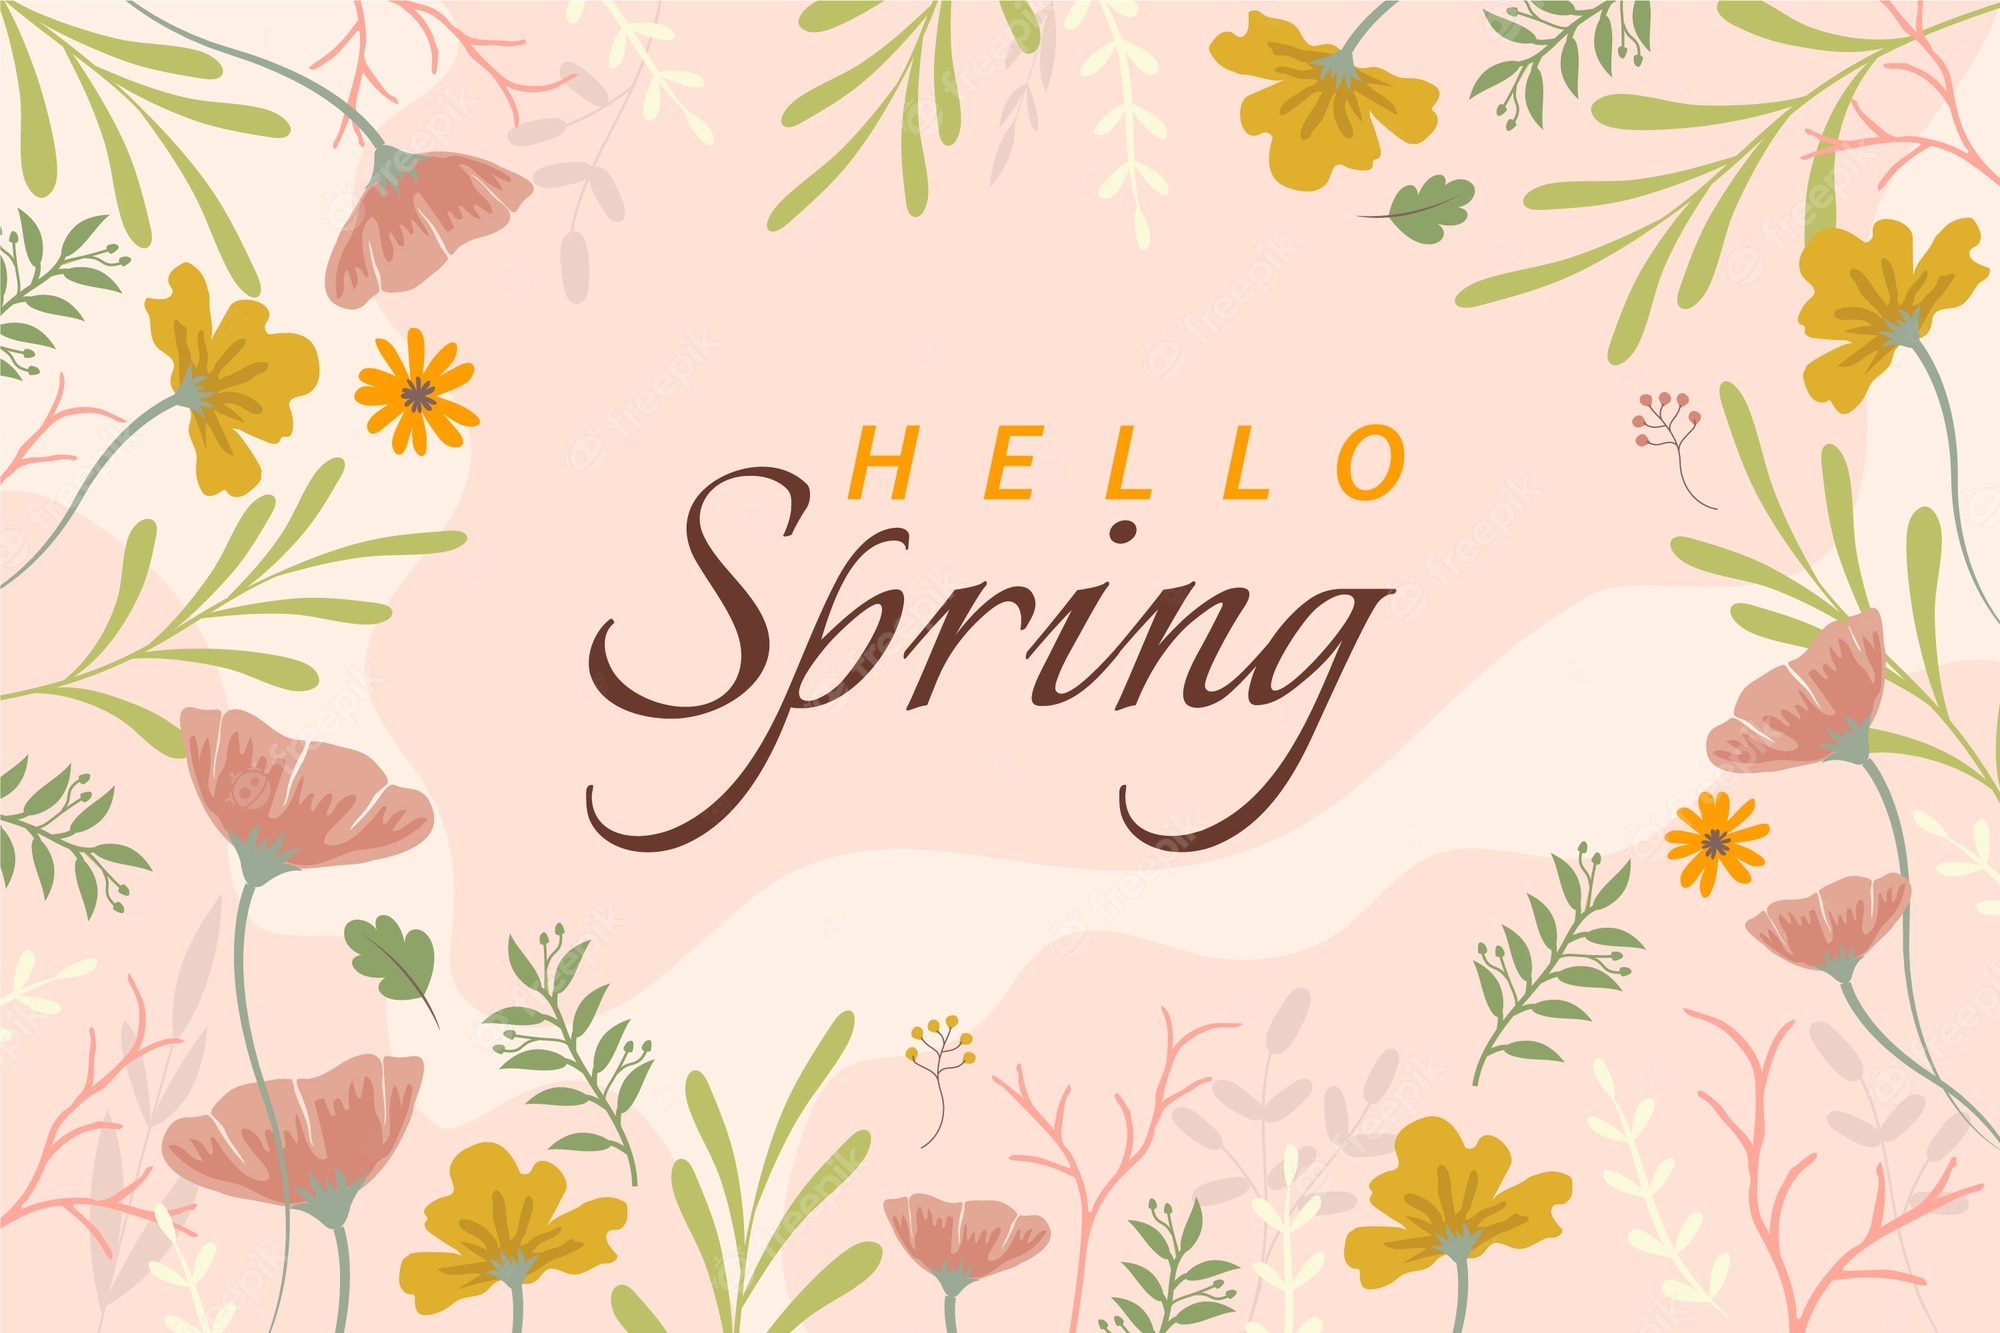 Free Vector. Flat design floral spring wallpaper with lettering